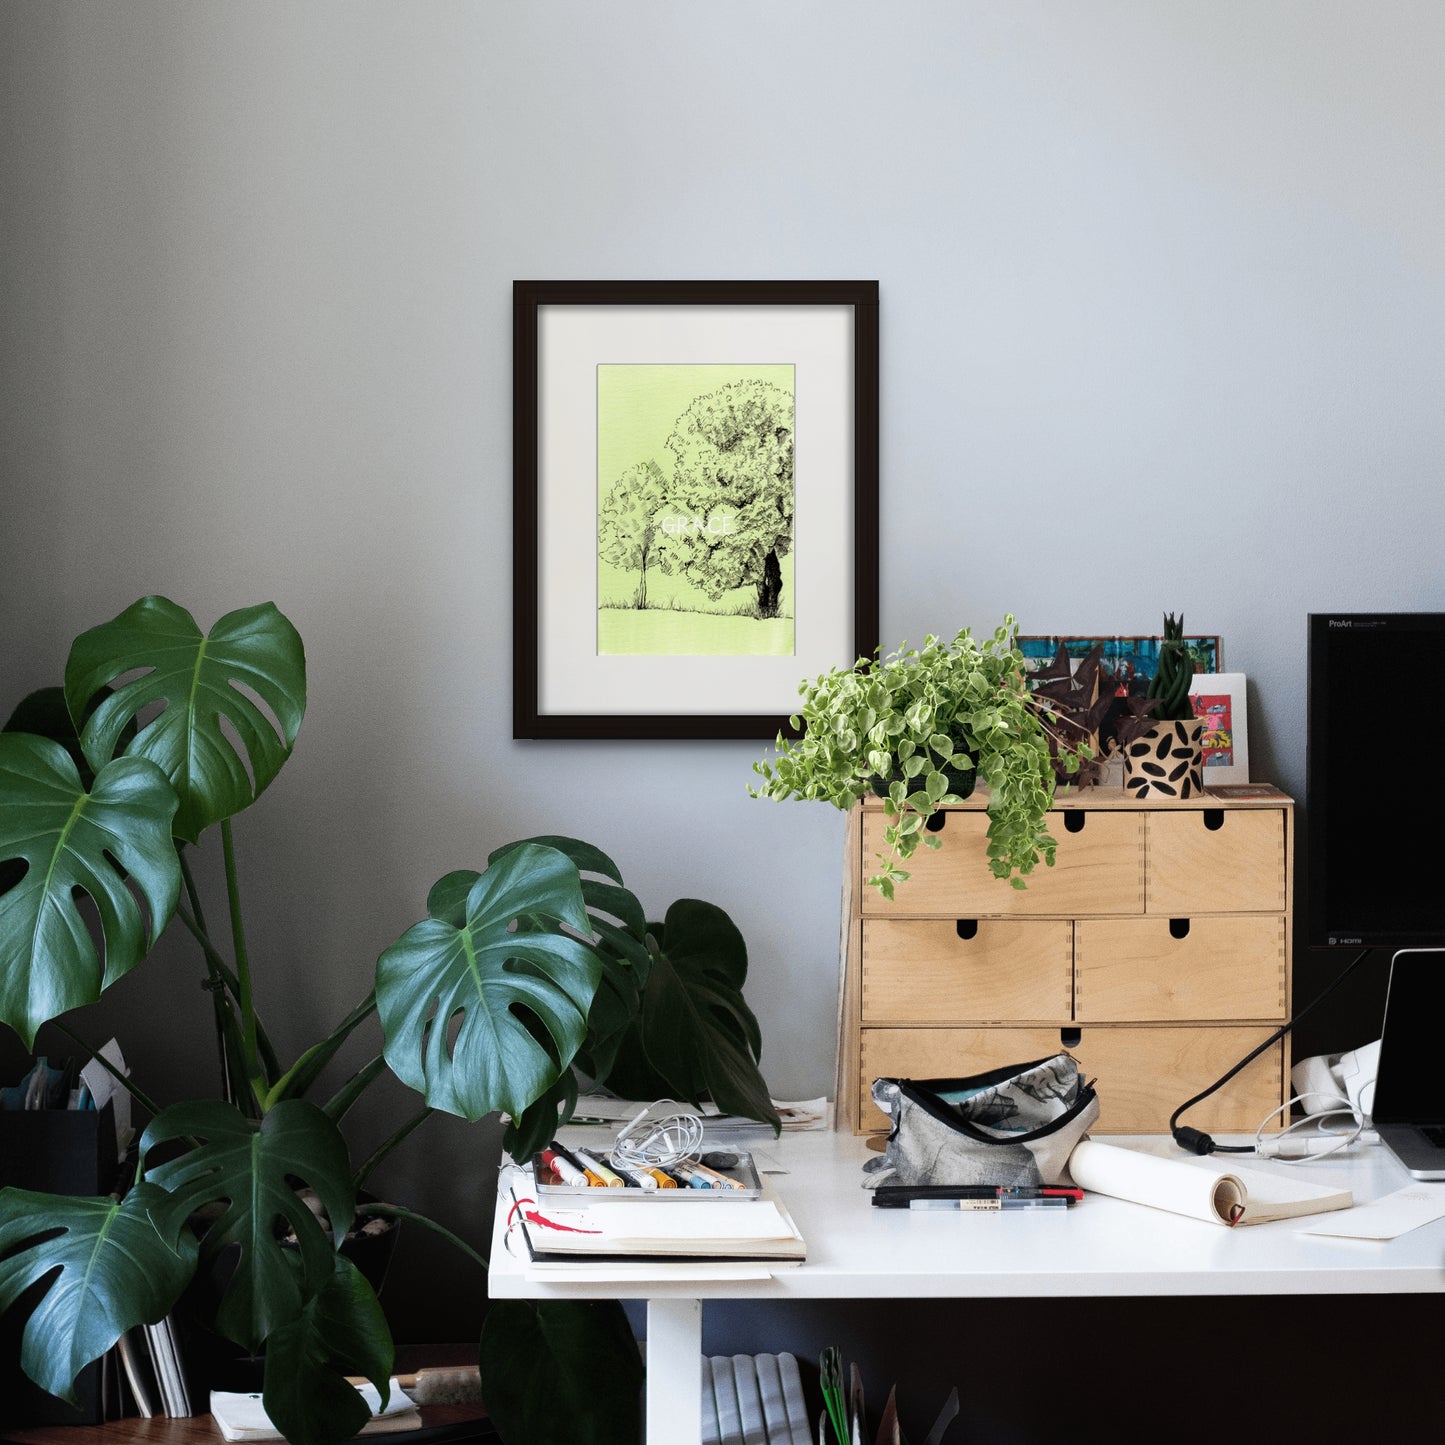 Image: Line drawing with watercolour giclée art print with black frame and cream colour mat of a peaceful, green nook at Parque da Cidade do Porto (Porto City Park). Art print in a home office work desk setting.